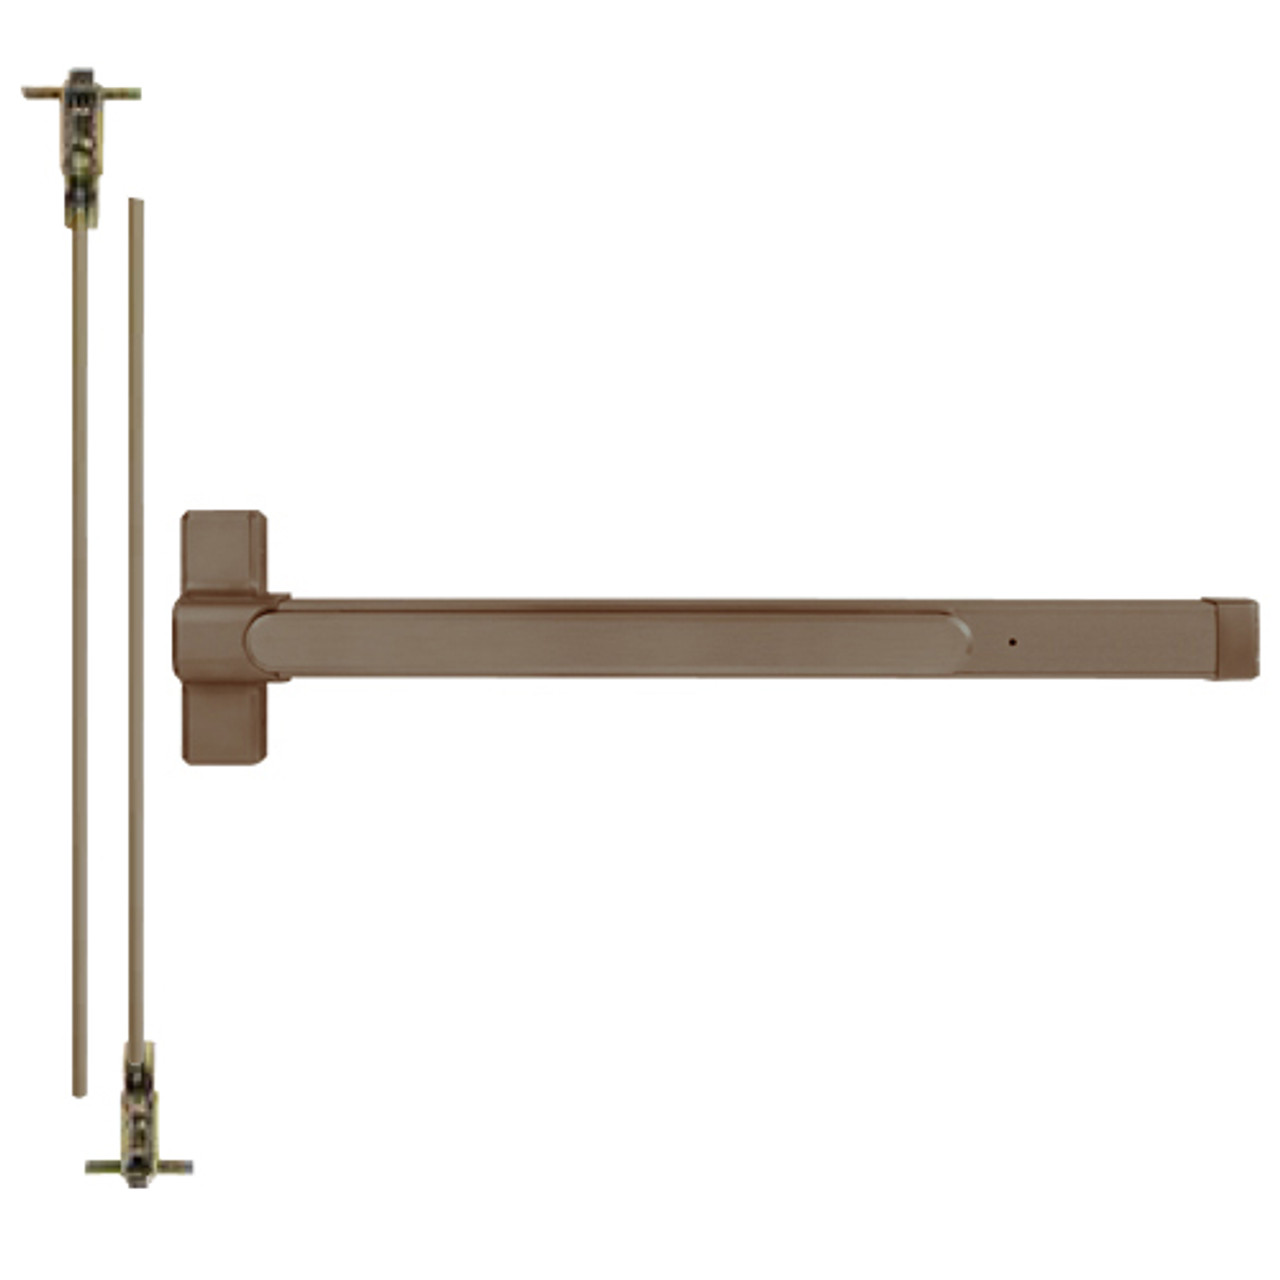 QED124LRX-48-8-313AN Stanley QED100 Series Heavy Duty Concealed Vertical Rod Hex Dog Exit Device in Anodized Duranodic Bronze Finish